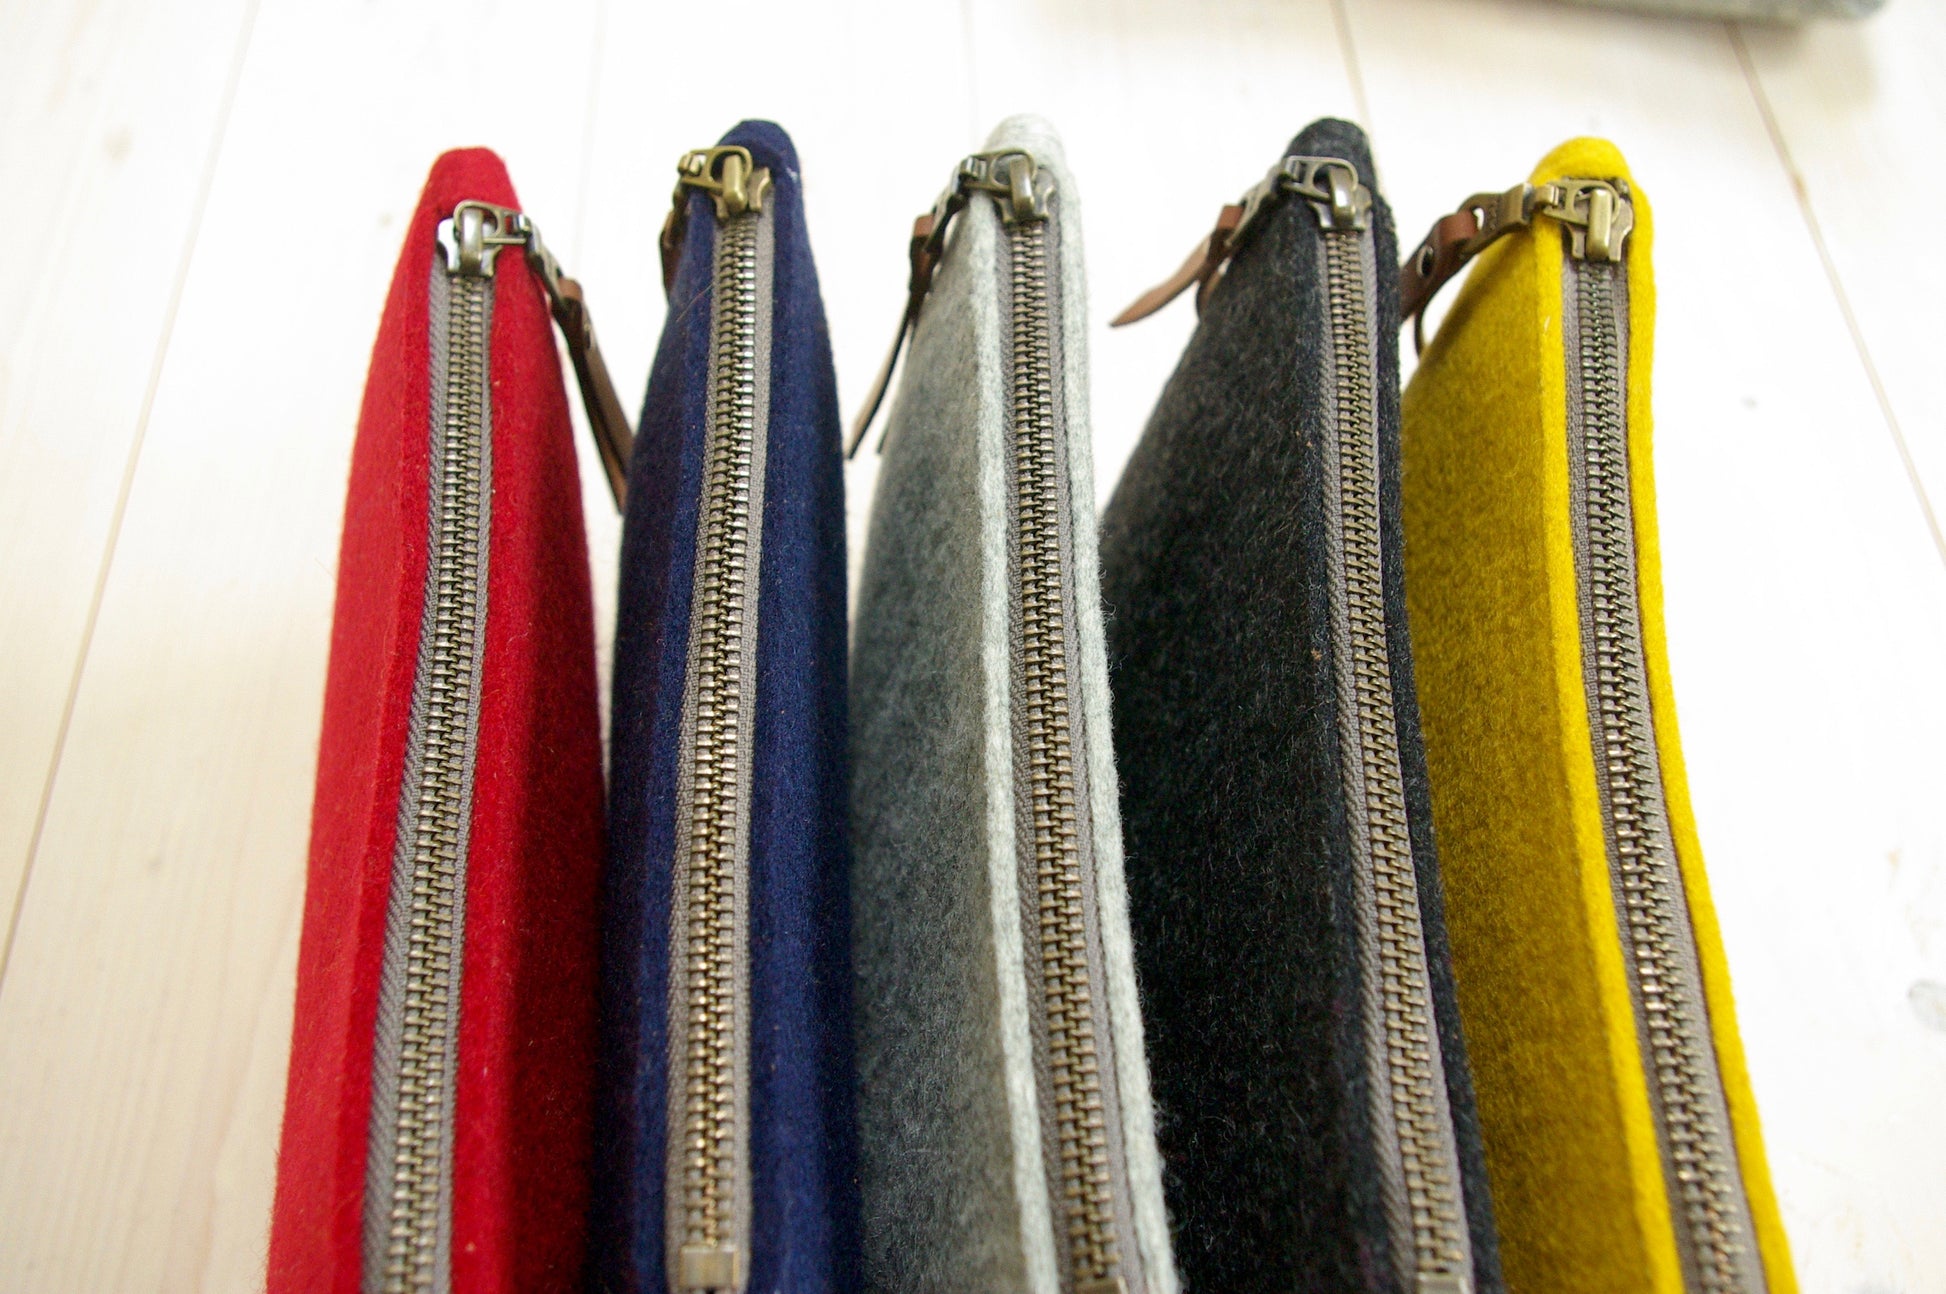 Accessory bags zipper from Westerman bags - colors